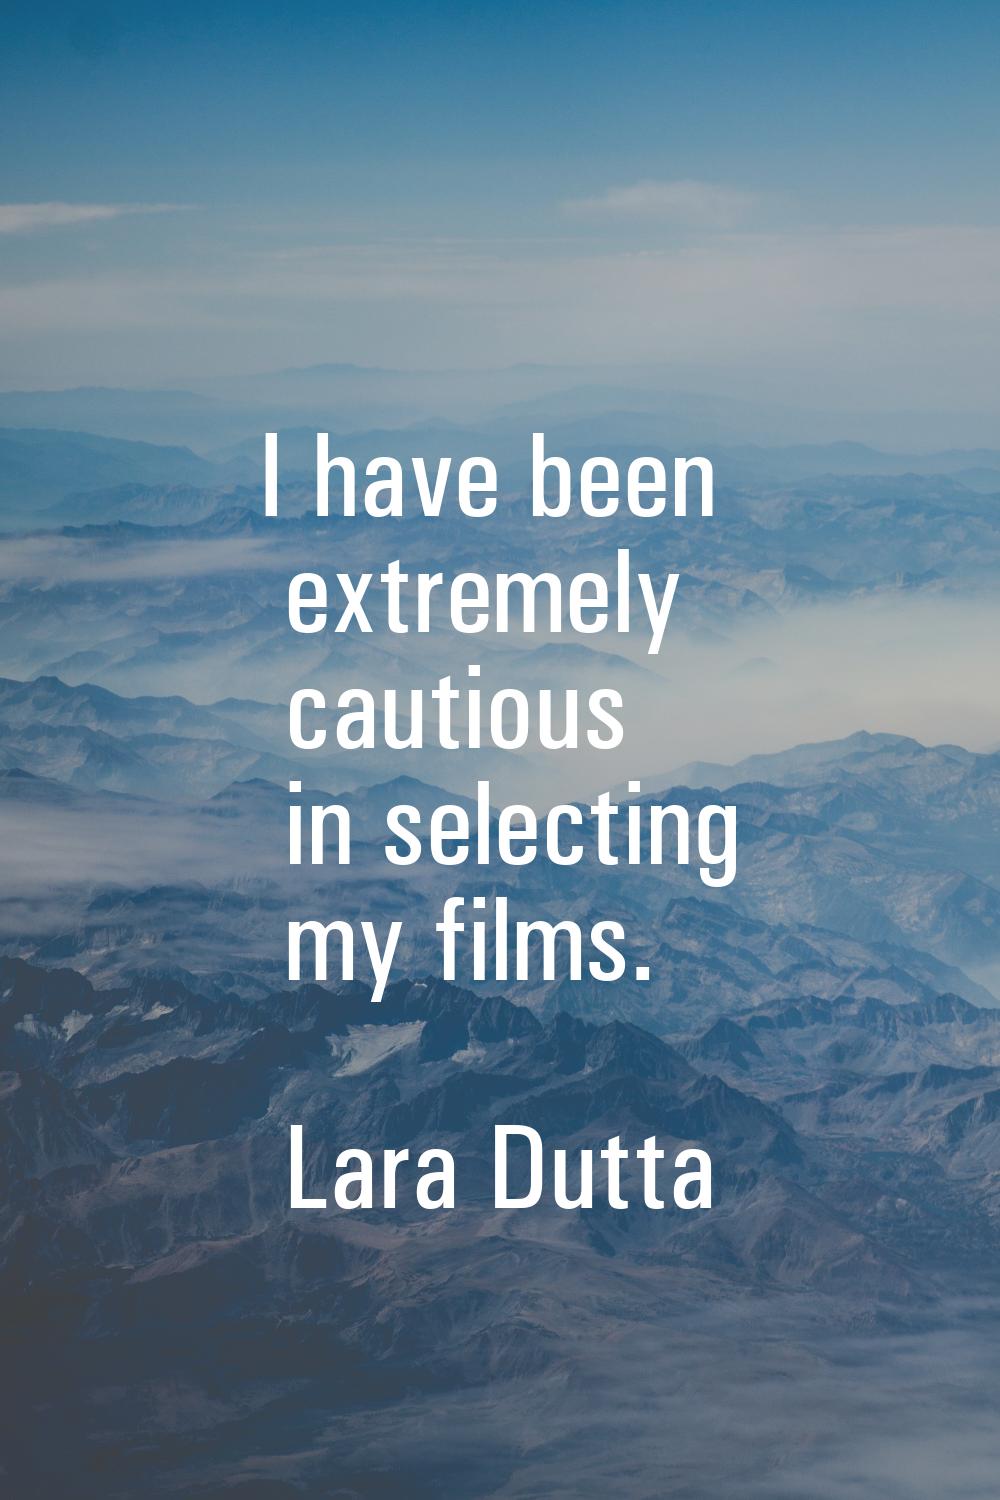 I have been extremely cautious in selecting my films.